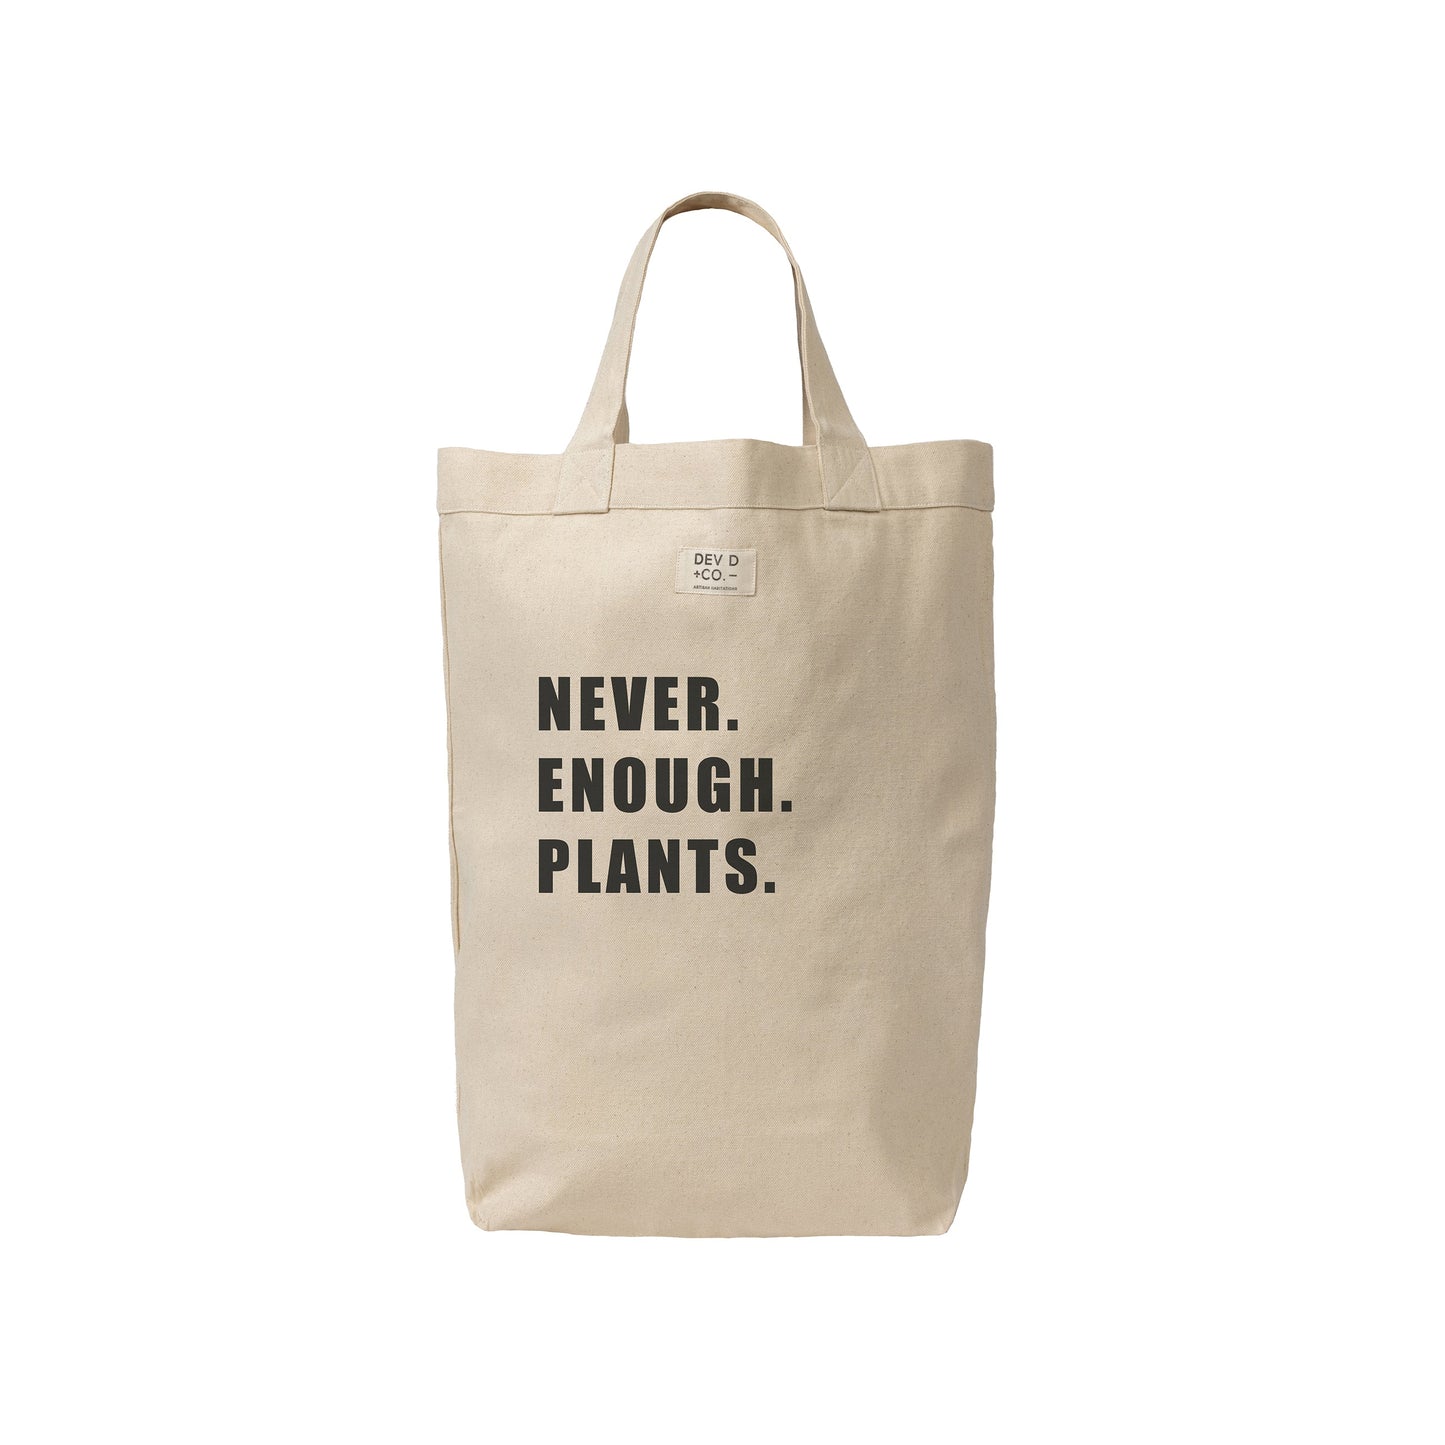 Never Enough Plants. - Canvas Tote Bag - Plant Lover Gift